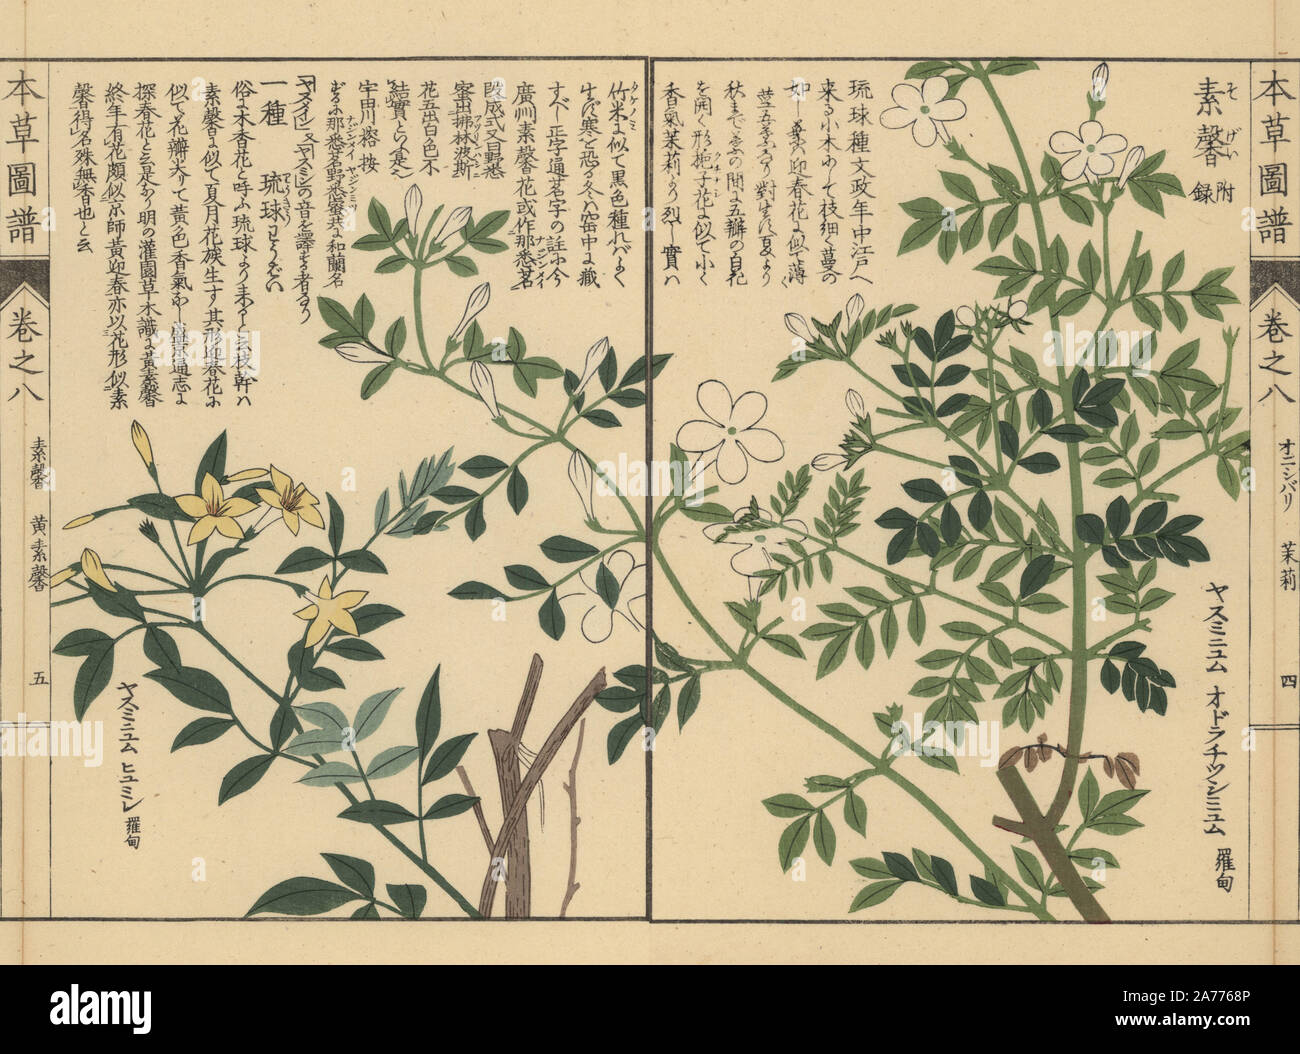 Spanish jasmine, Jasminum grandiflorum, and showy jasmine, Jasminum floridum. Colour-printed woodblock engraving by Kan'en Iwasaki from 'Honzo Zufu,' an Illustrated Guide to Medicinal Plants, Japan, 1884. Iwasaki (1786-1842) was a Japanese botanist, entomologist and zoologist. He was one of the first Japanese botanists to incorporate western knowledge into his studies. Stock Photo